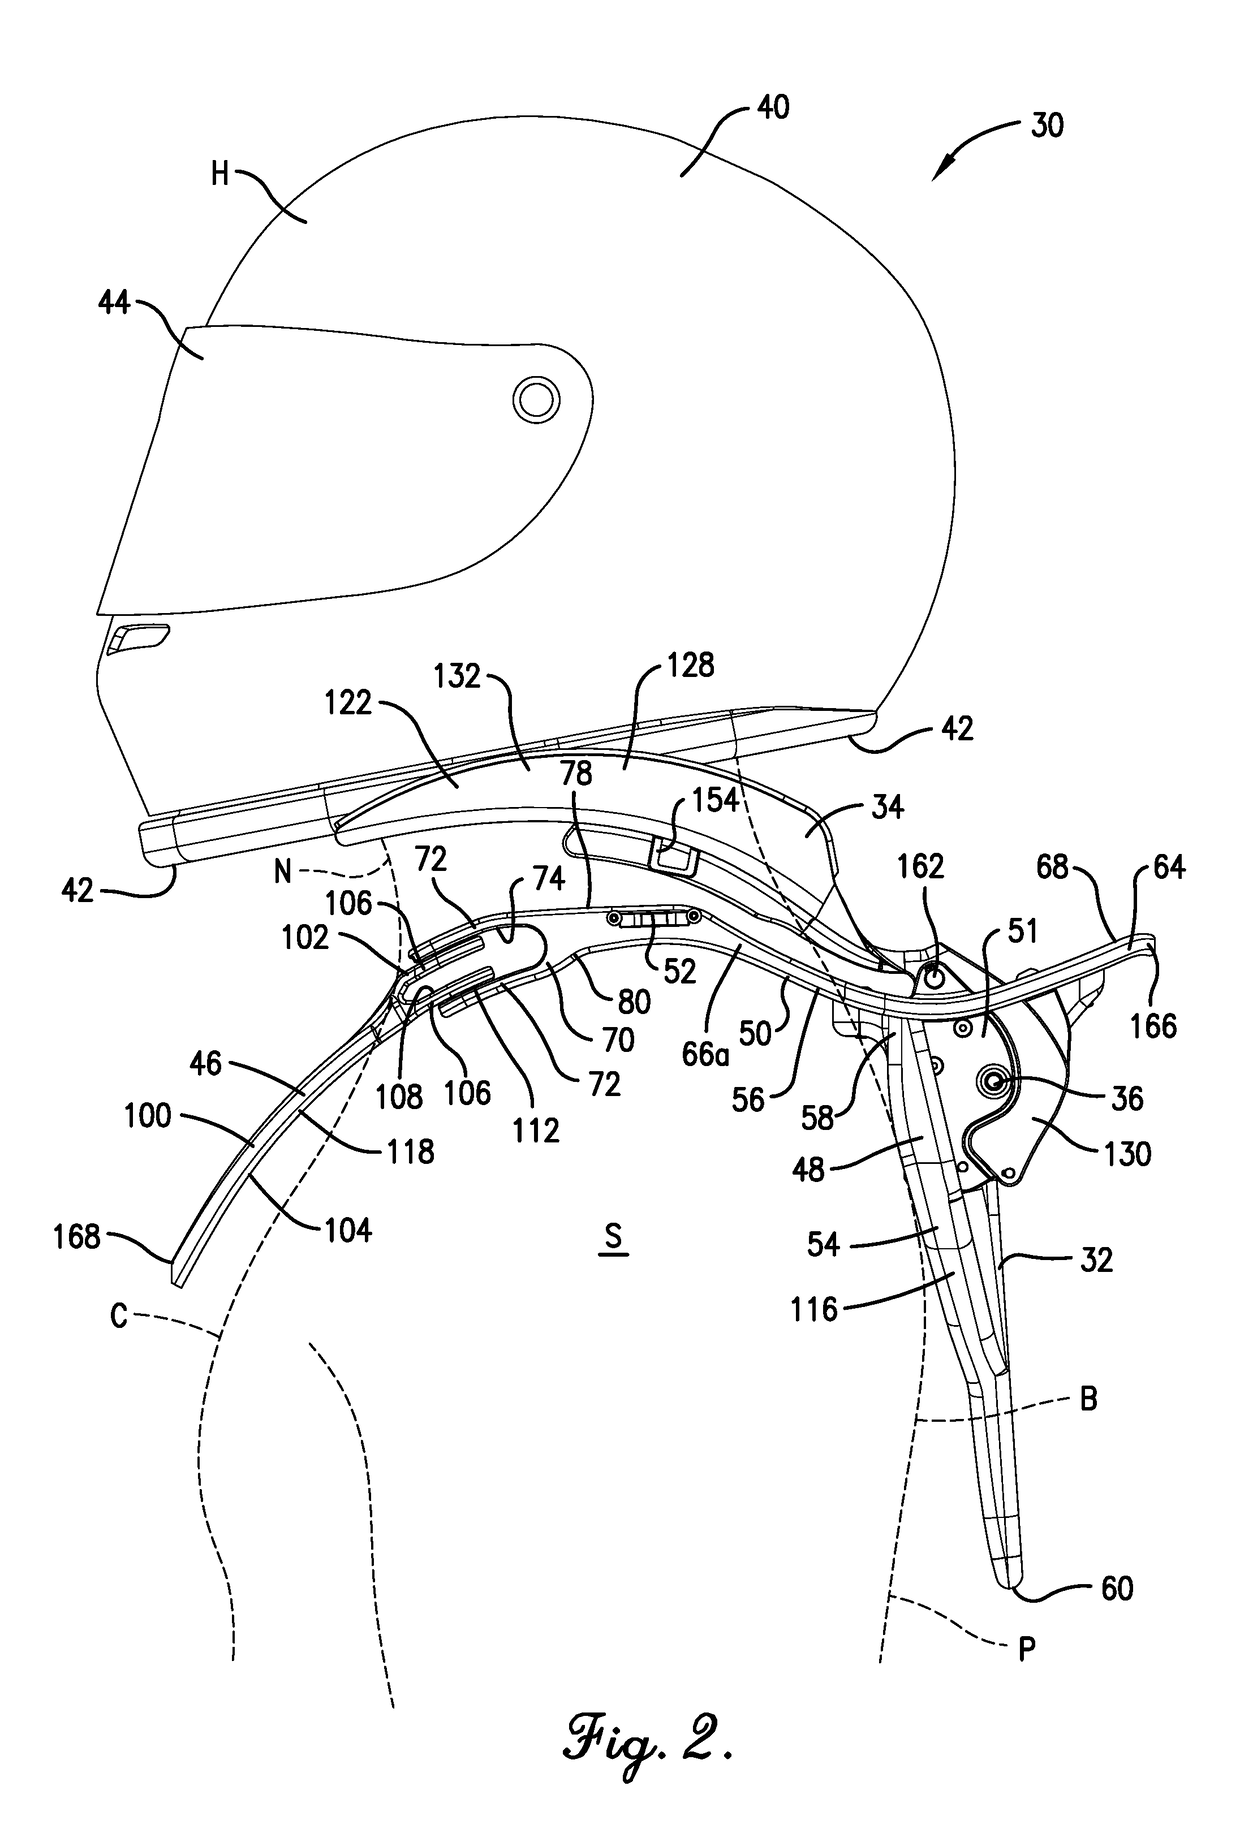 Device for reducing head and neck injury for helmet wearer